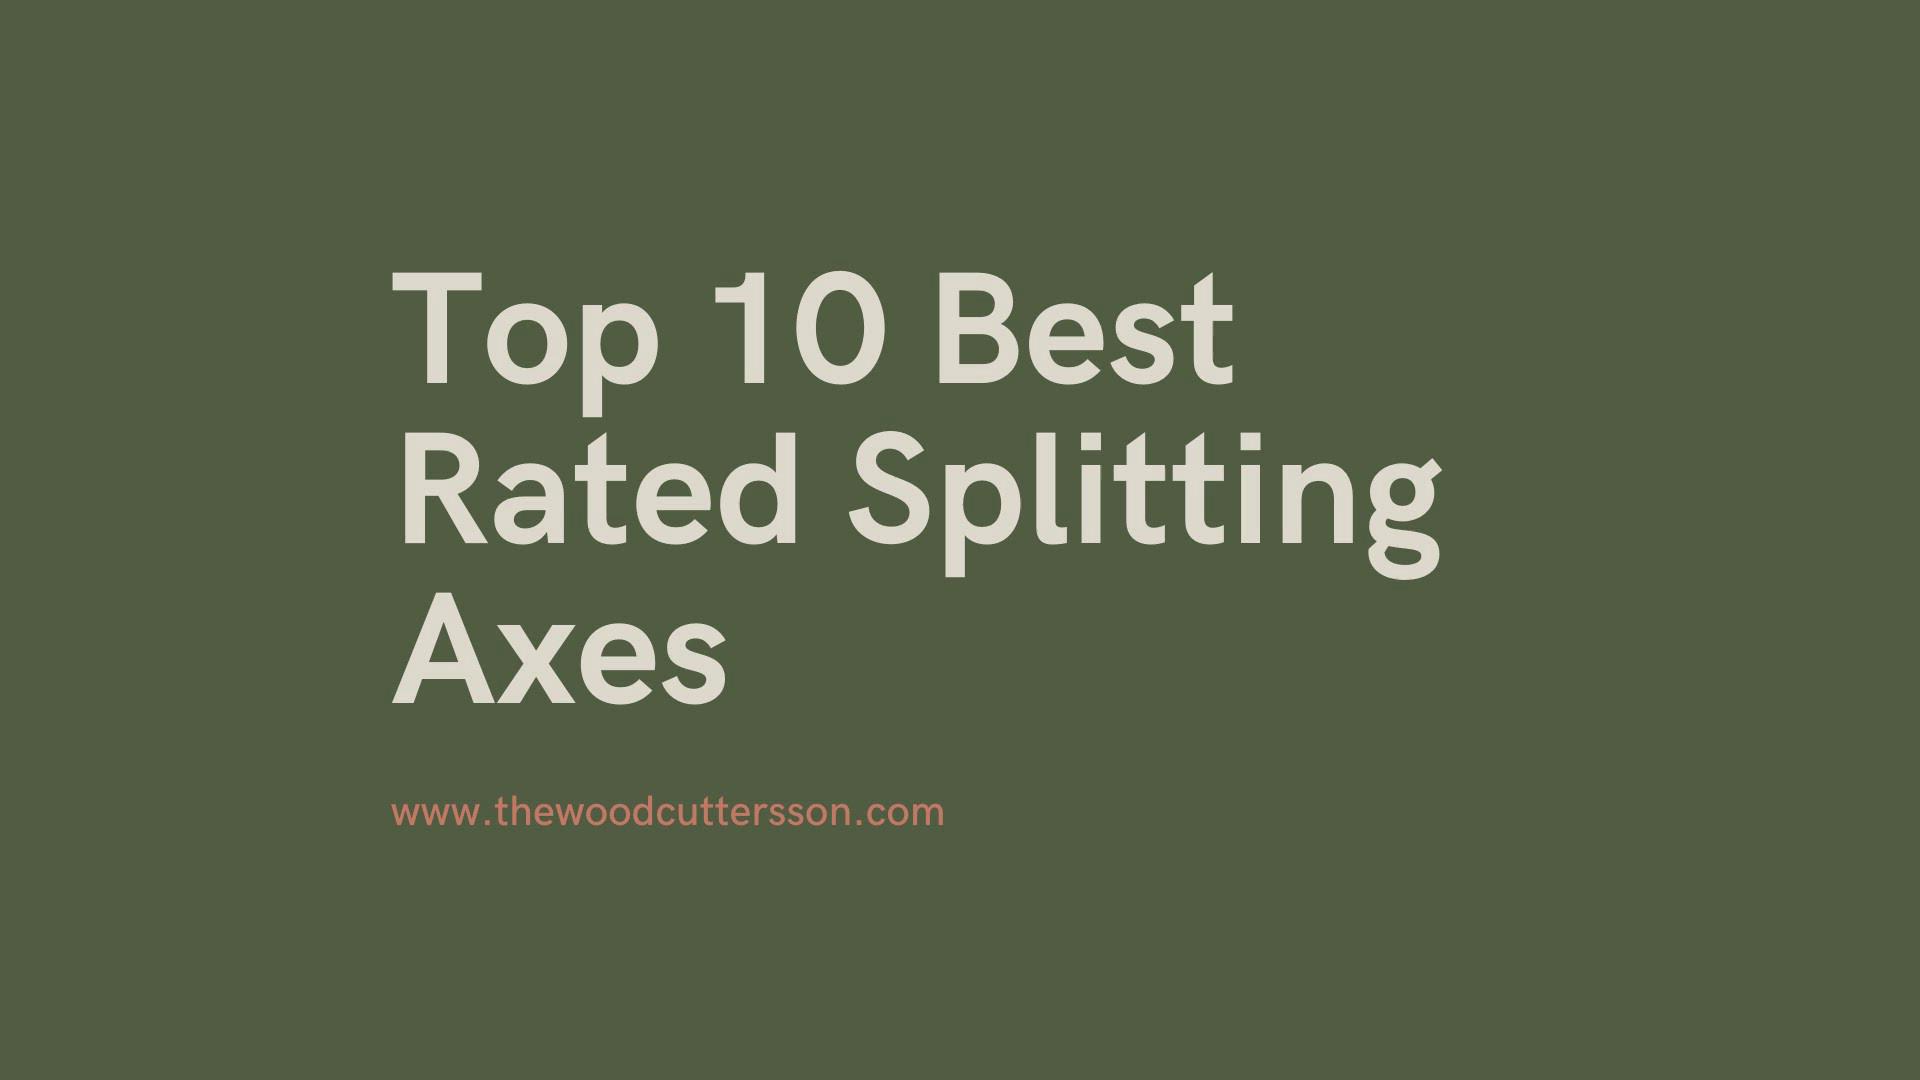 'Video thumbnail for Top 10 Best Rated Splitting Axes'